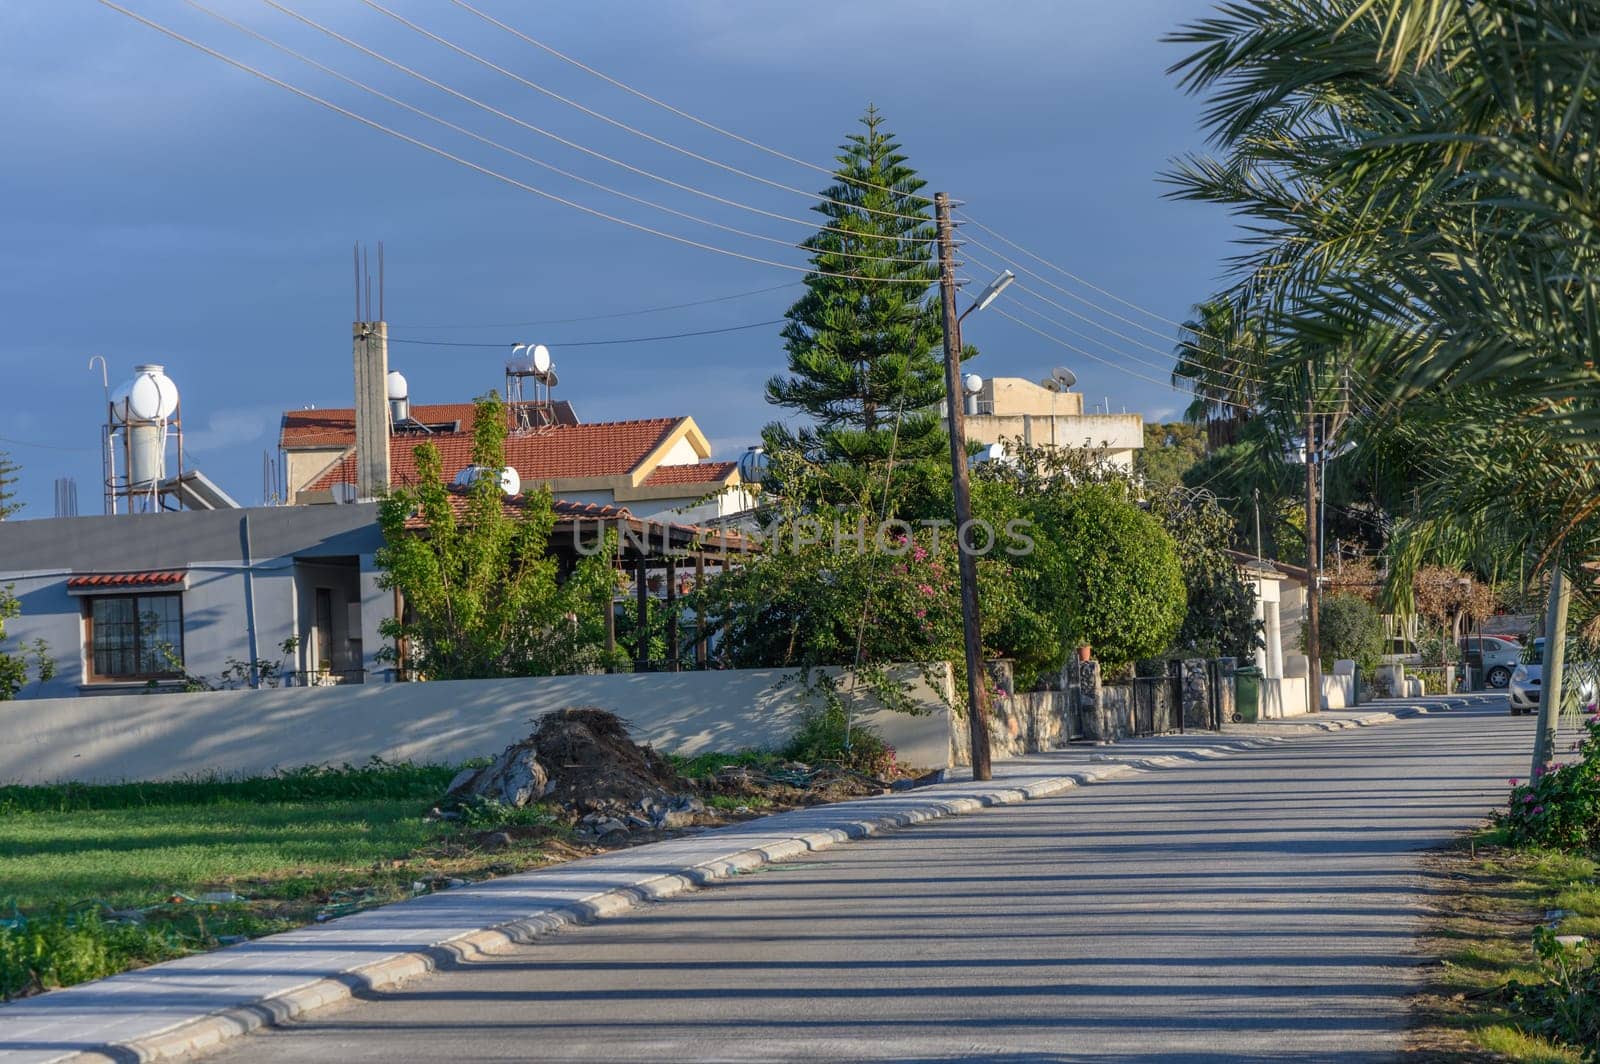 street in a village on the island of Cyprus 1 by Mixa74